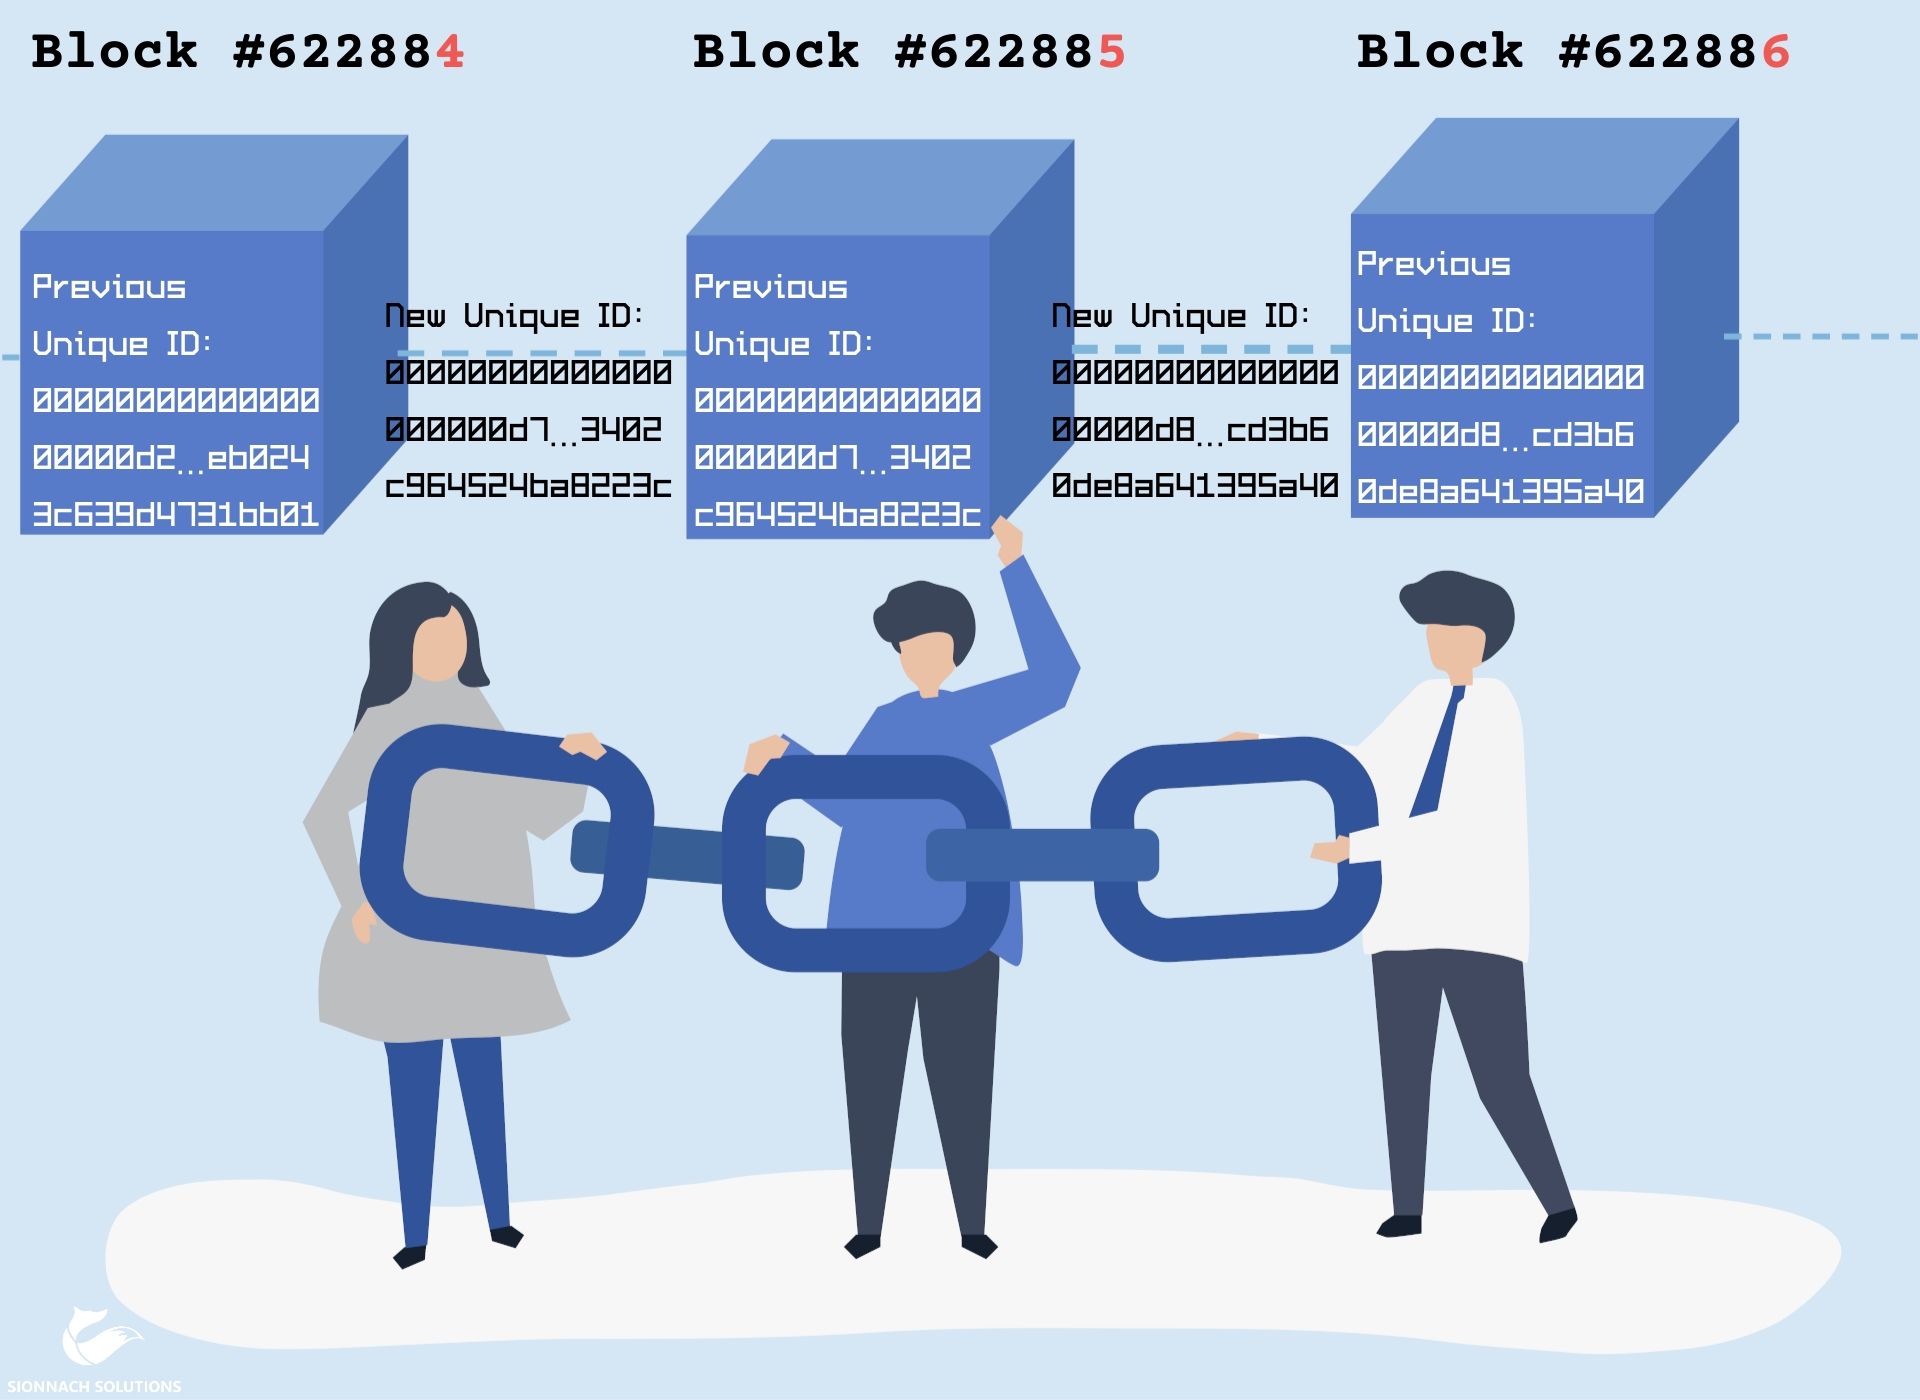 A simplified depiction of the Bitcoin blockchain showing that each block contains the reference to the previous block's unique ID.